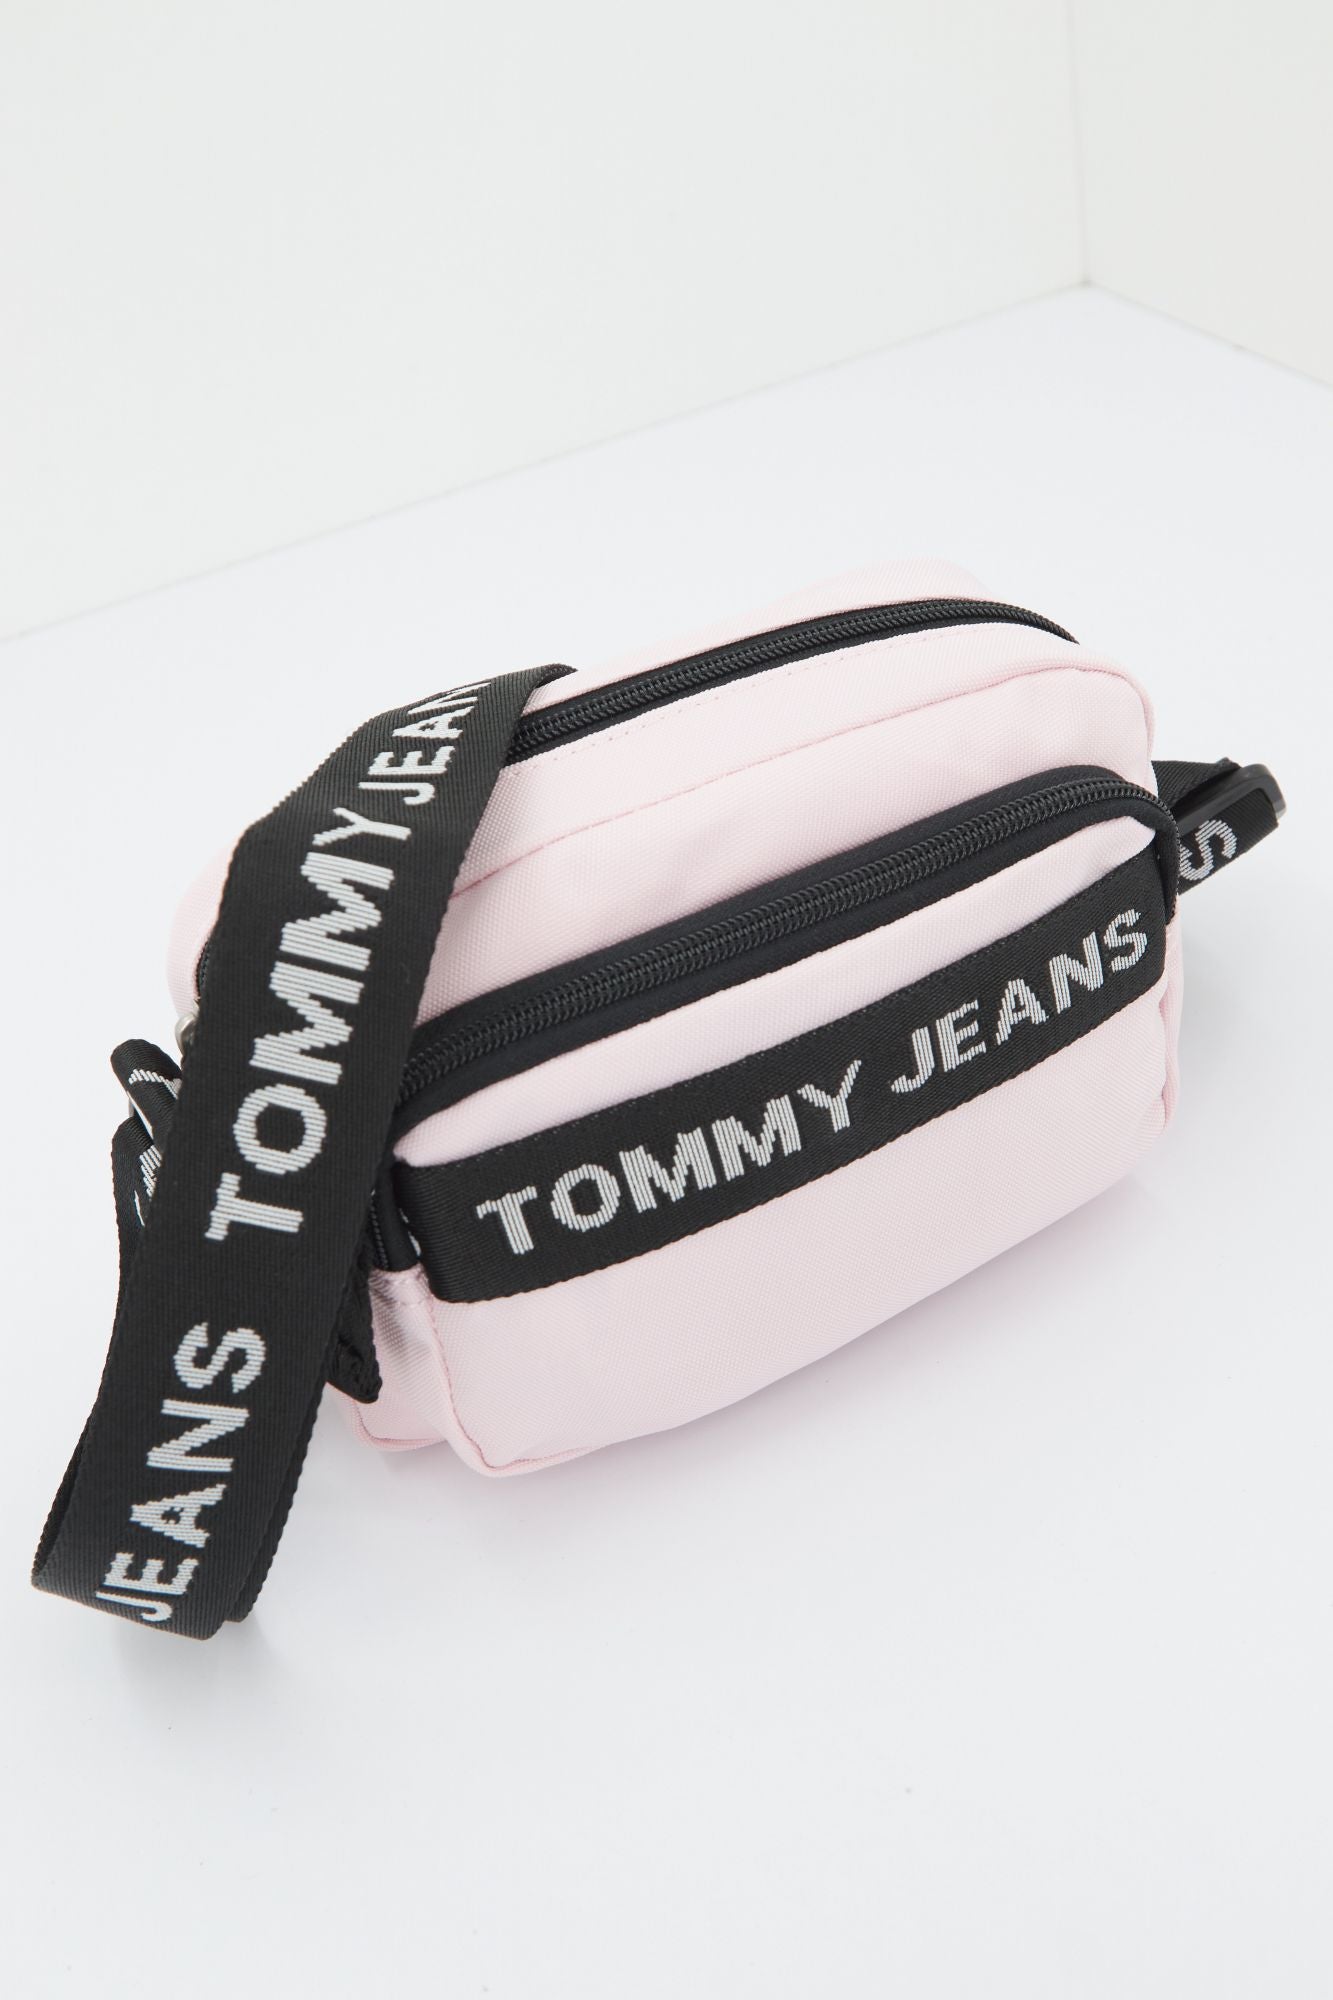 TOMMY JEANS ESSENTIAL CROSSOVER en color ROSA (3)